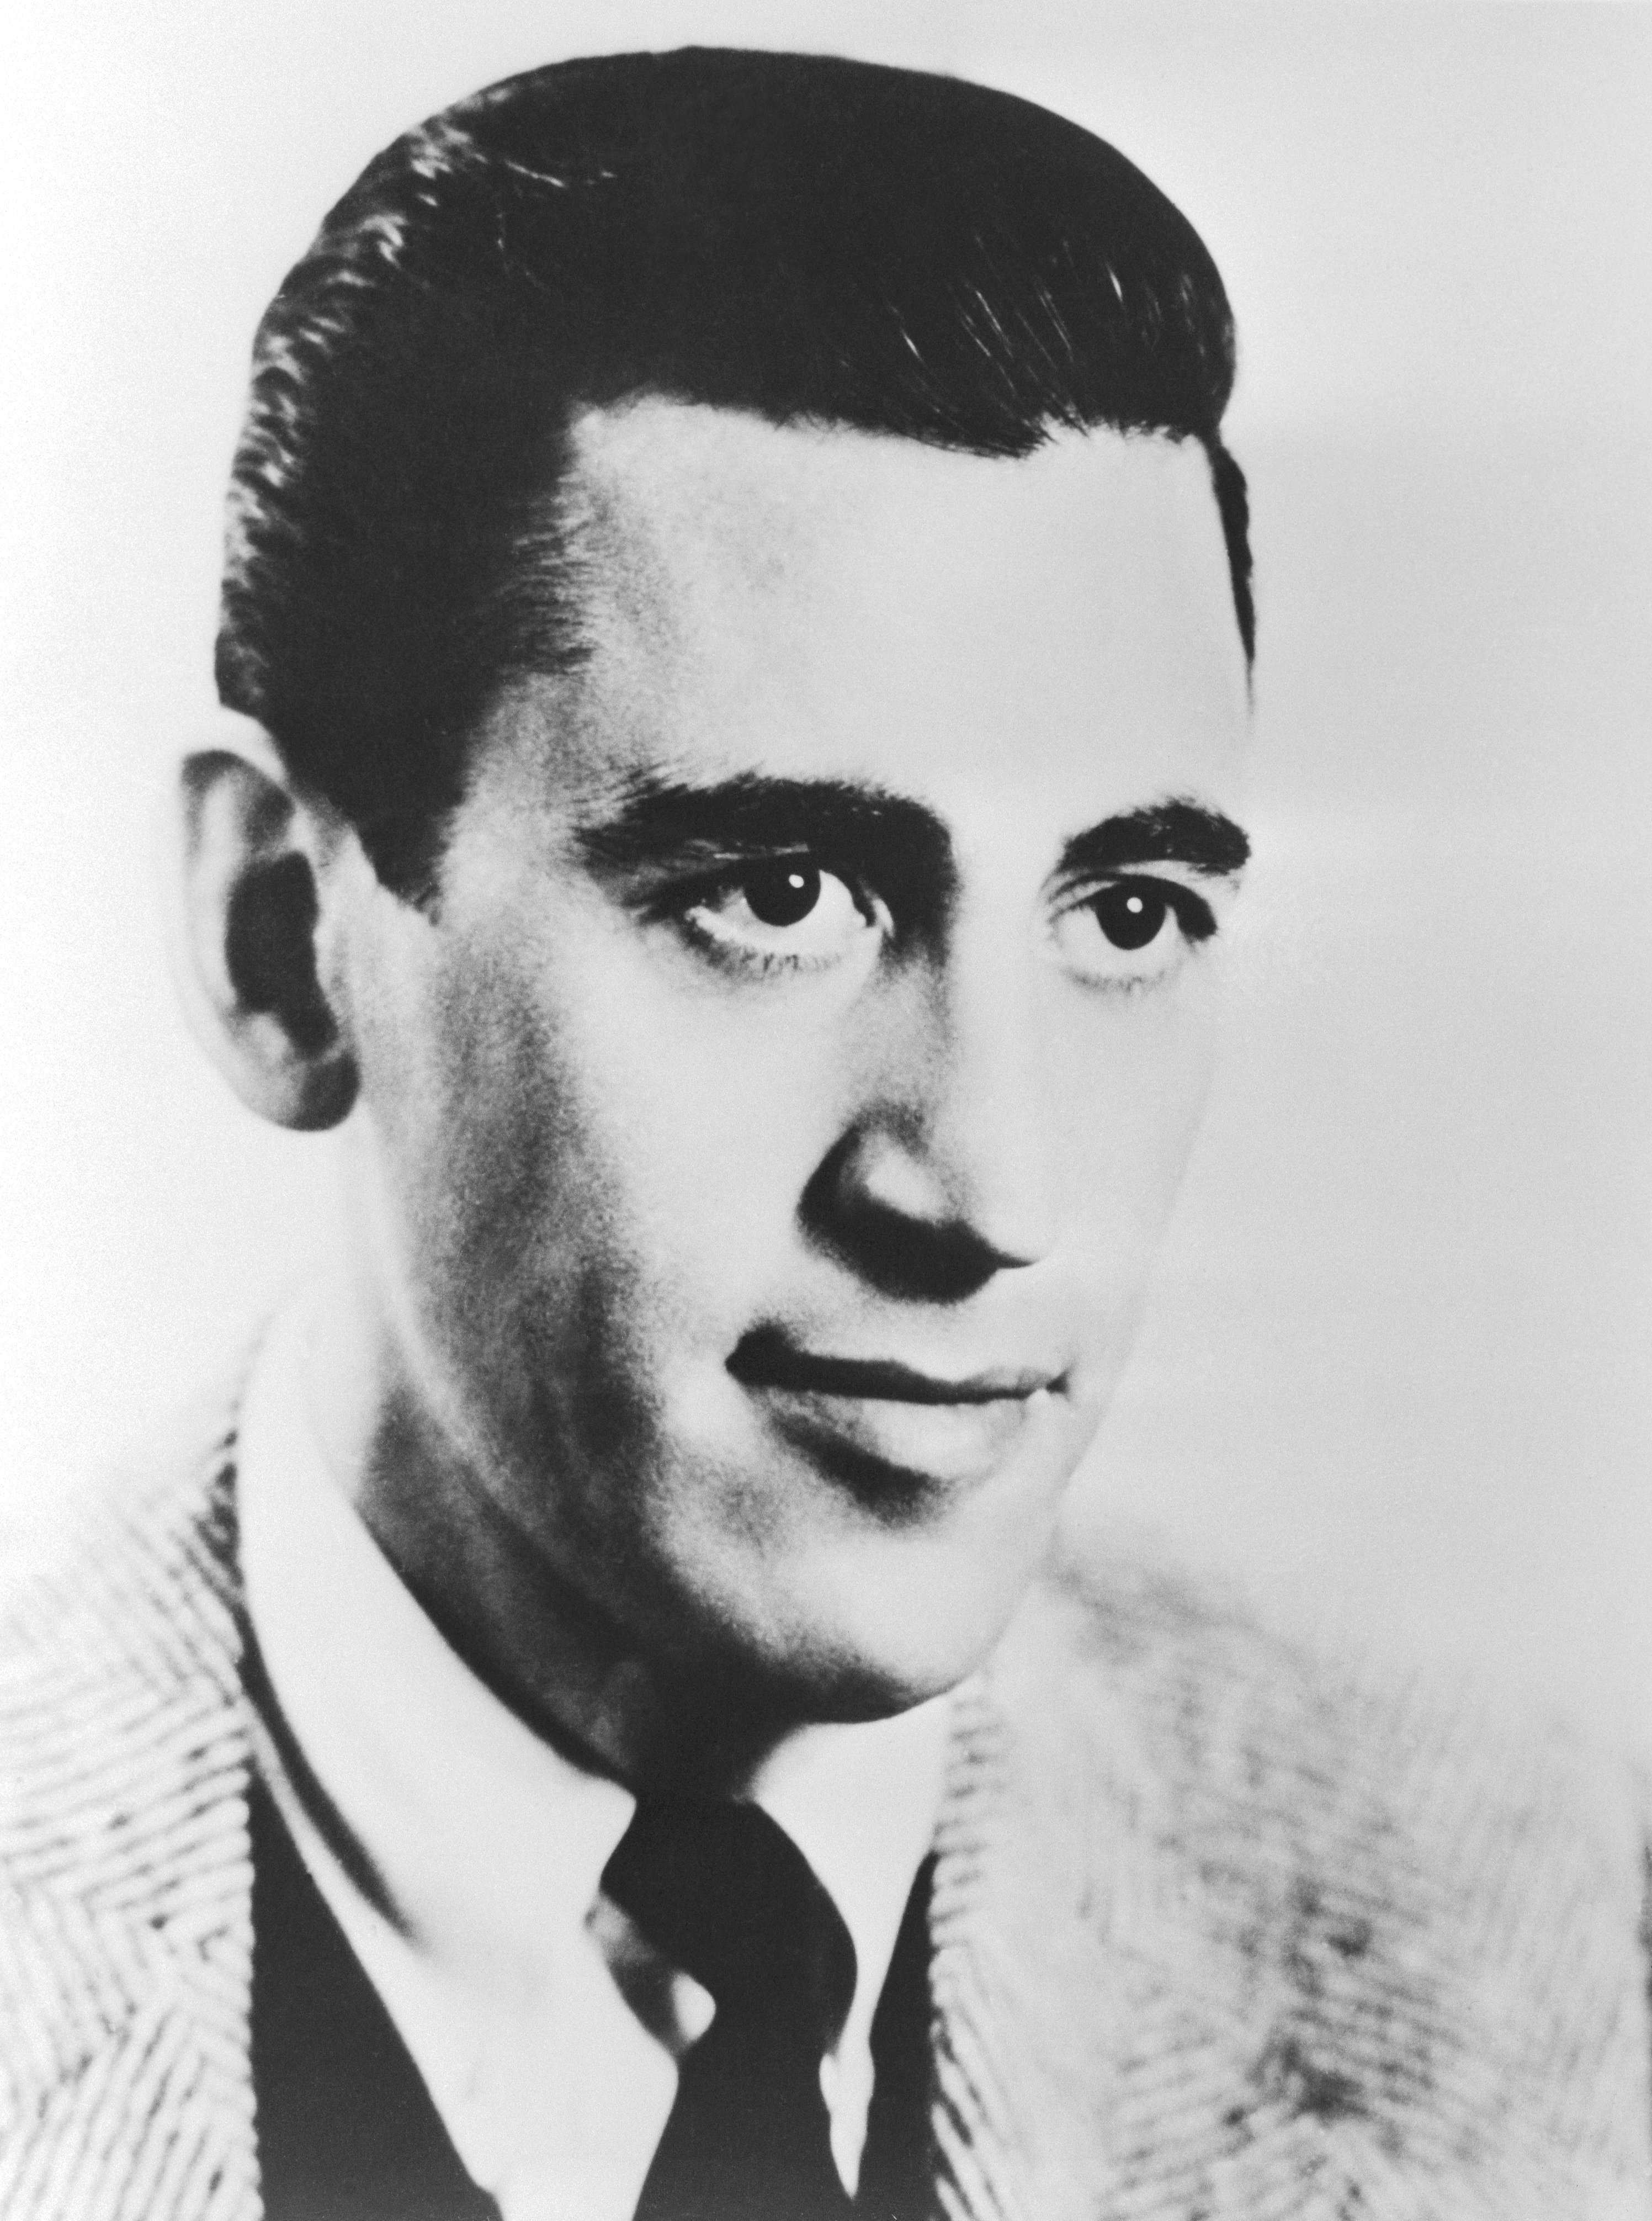 "Catcher in the Rye" author J.D. Salinger circa January 1951. | Source: Getty Images